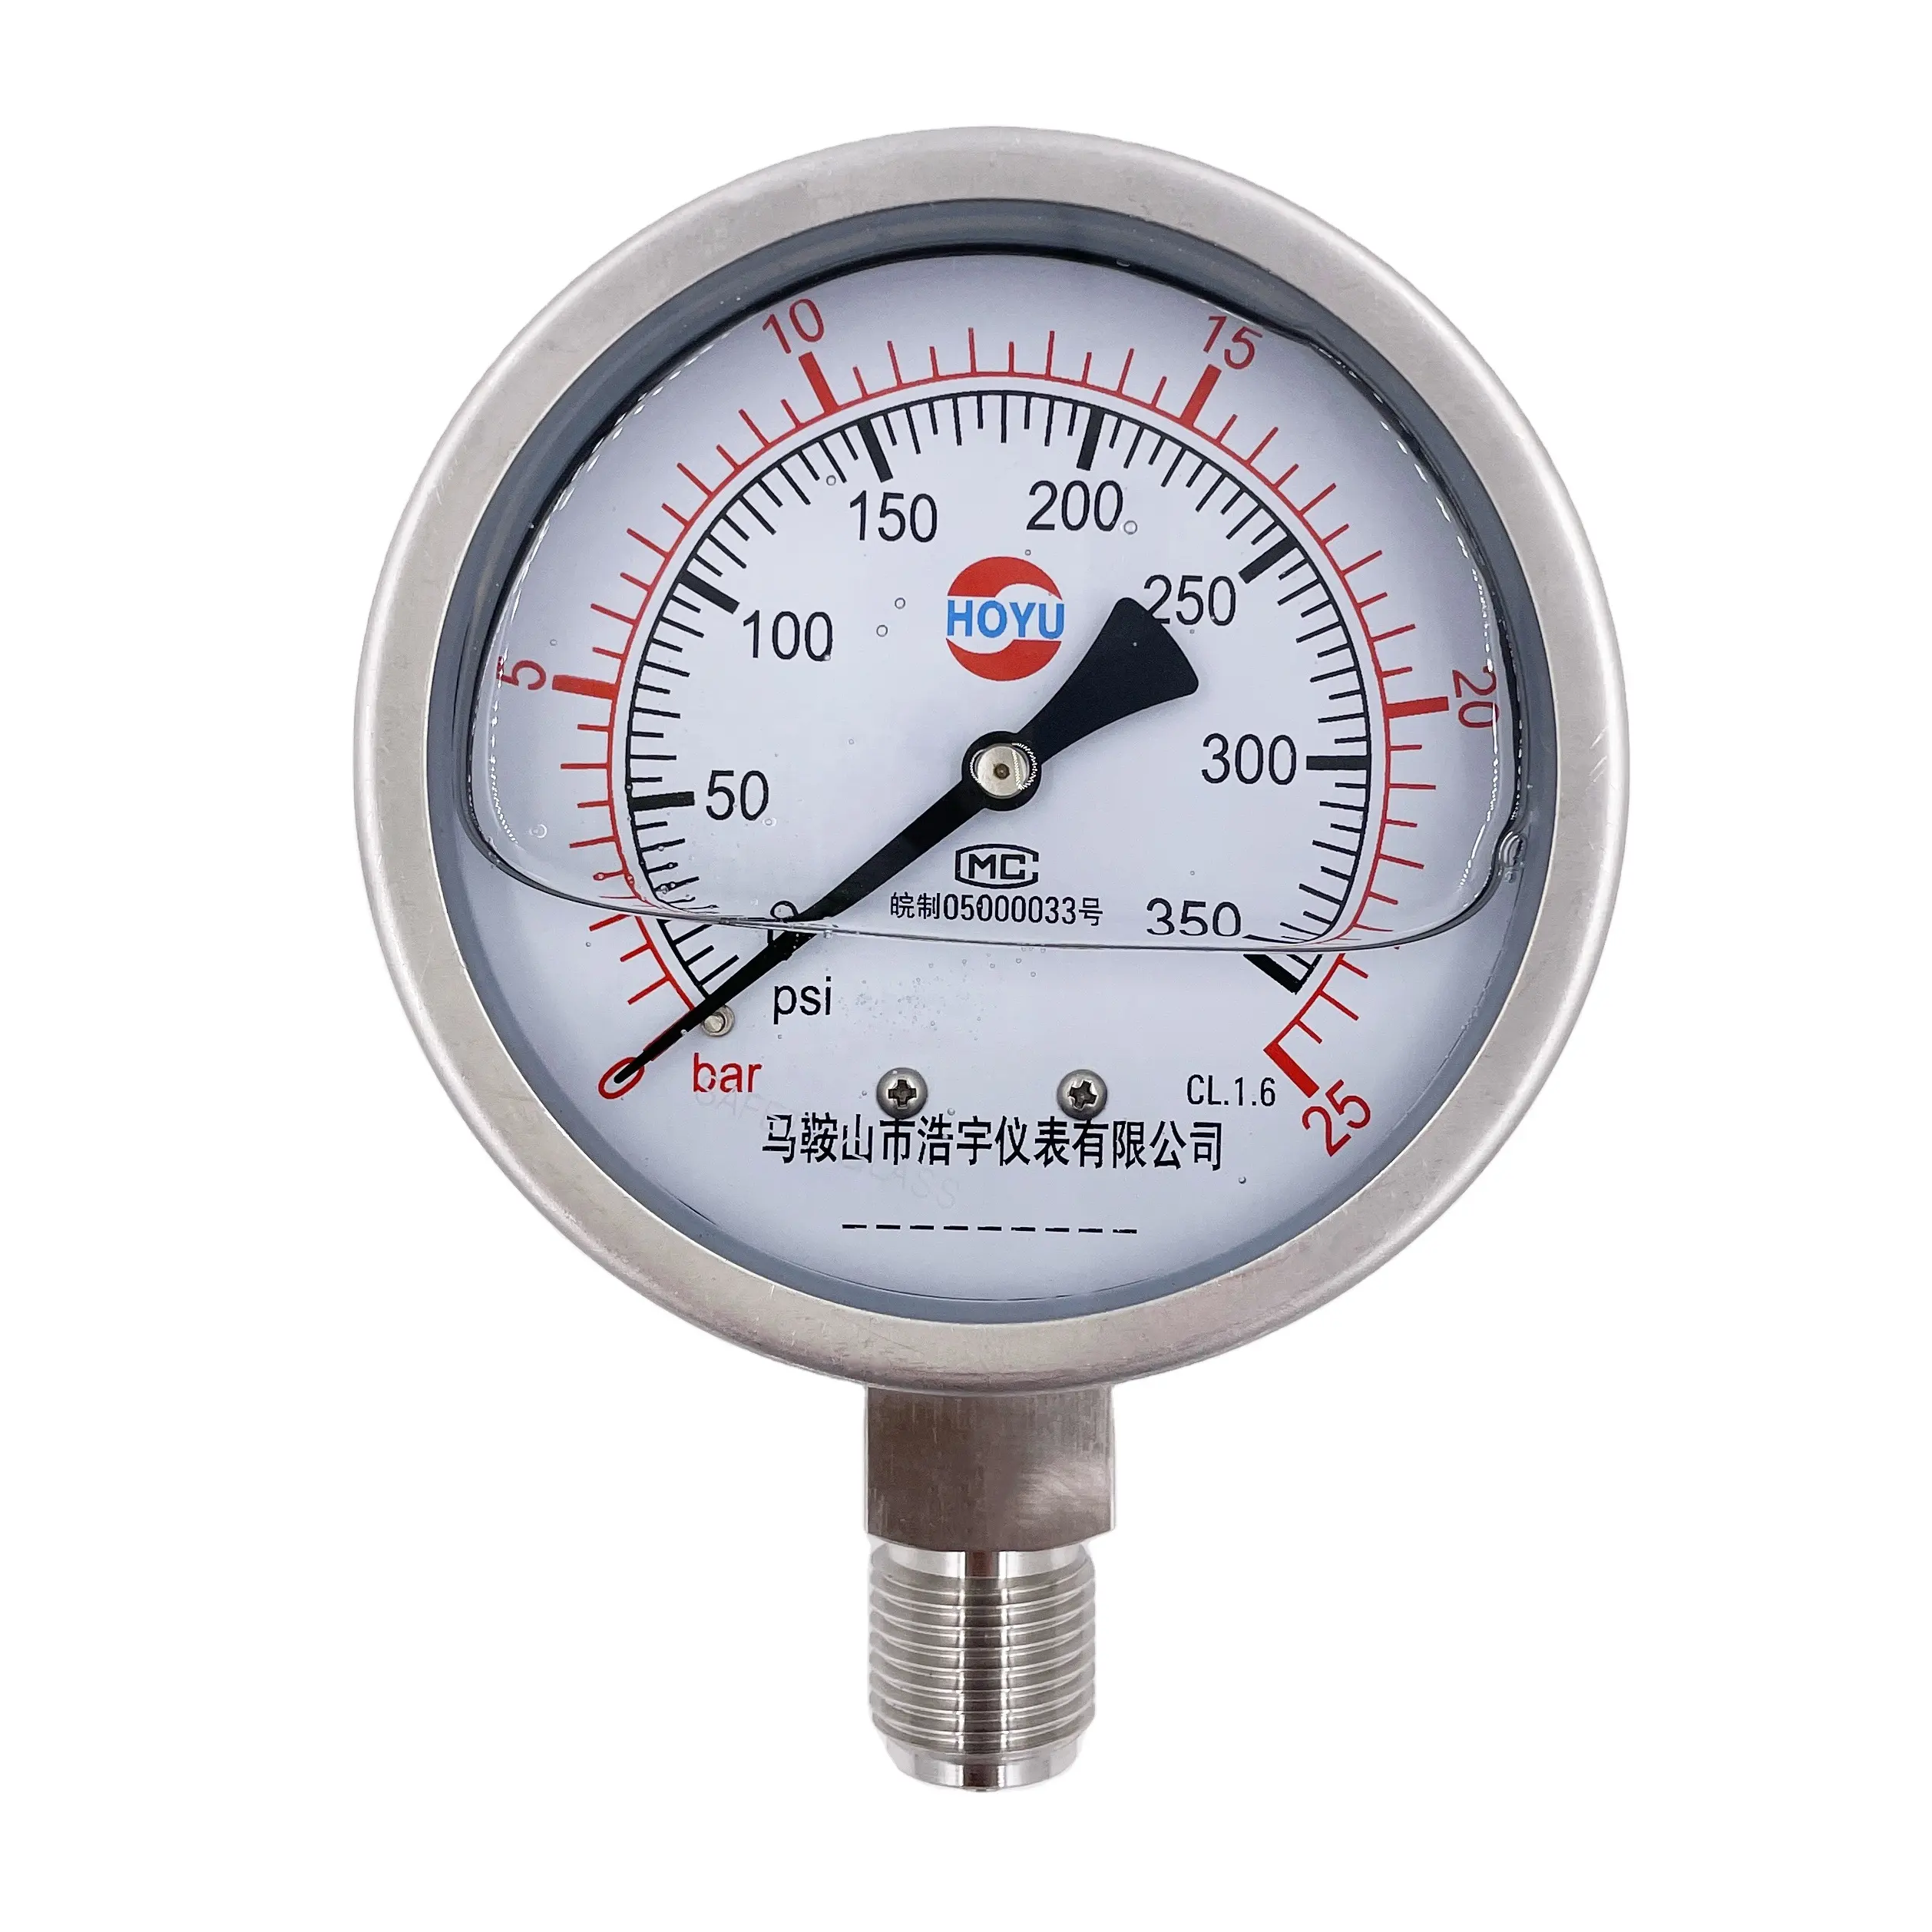 High end all stainless steel radial, shock and corrosion resistant hydraulic oil filled pressure gauge